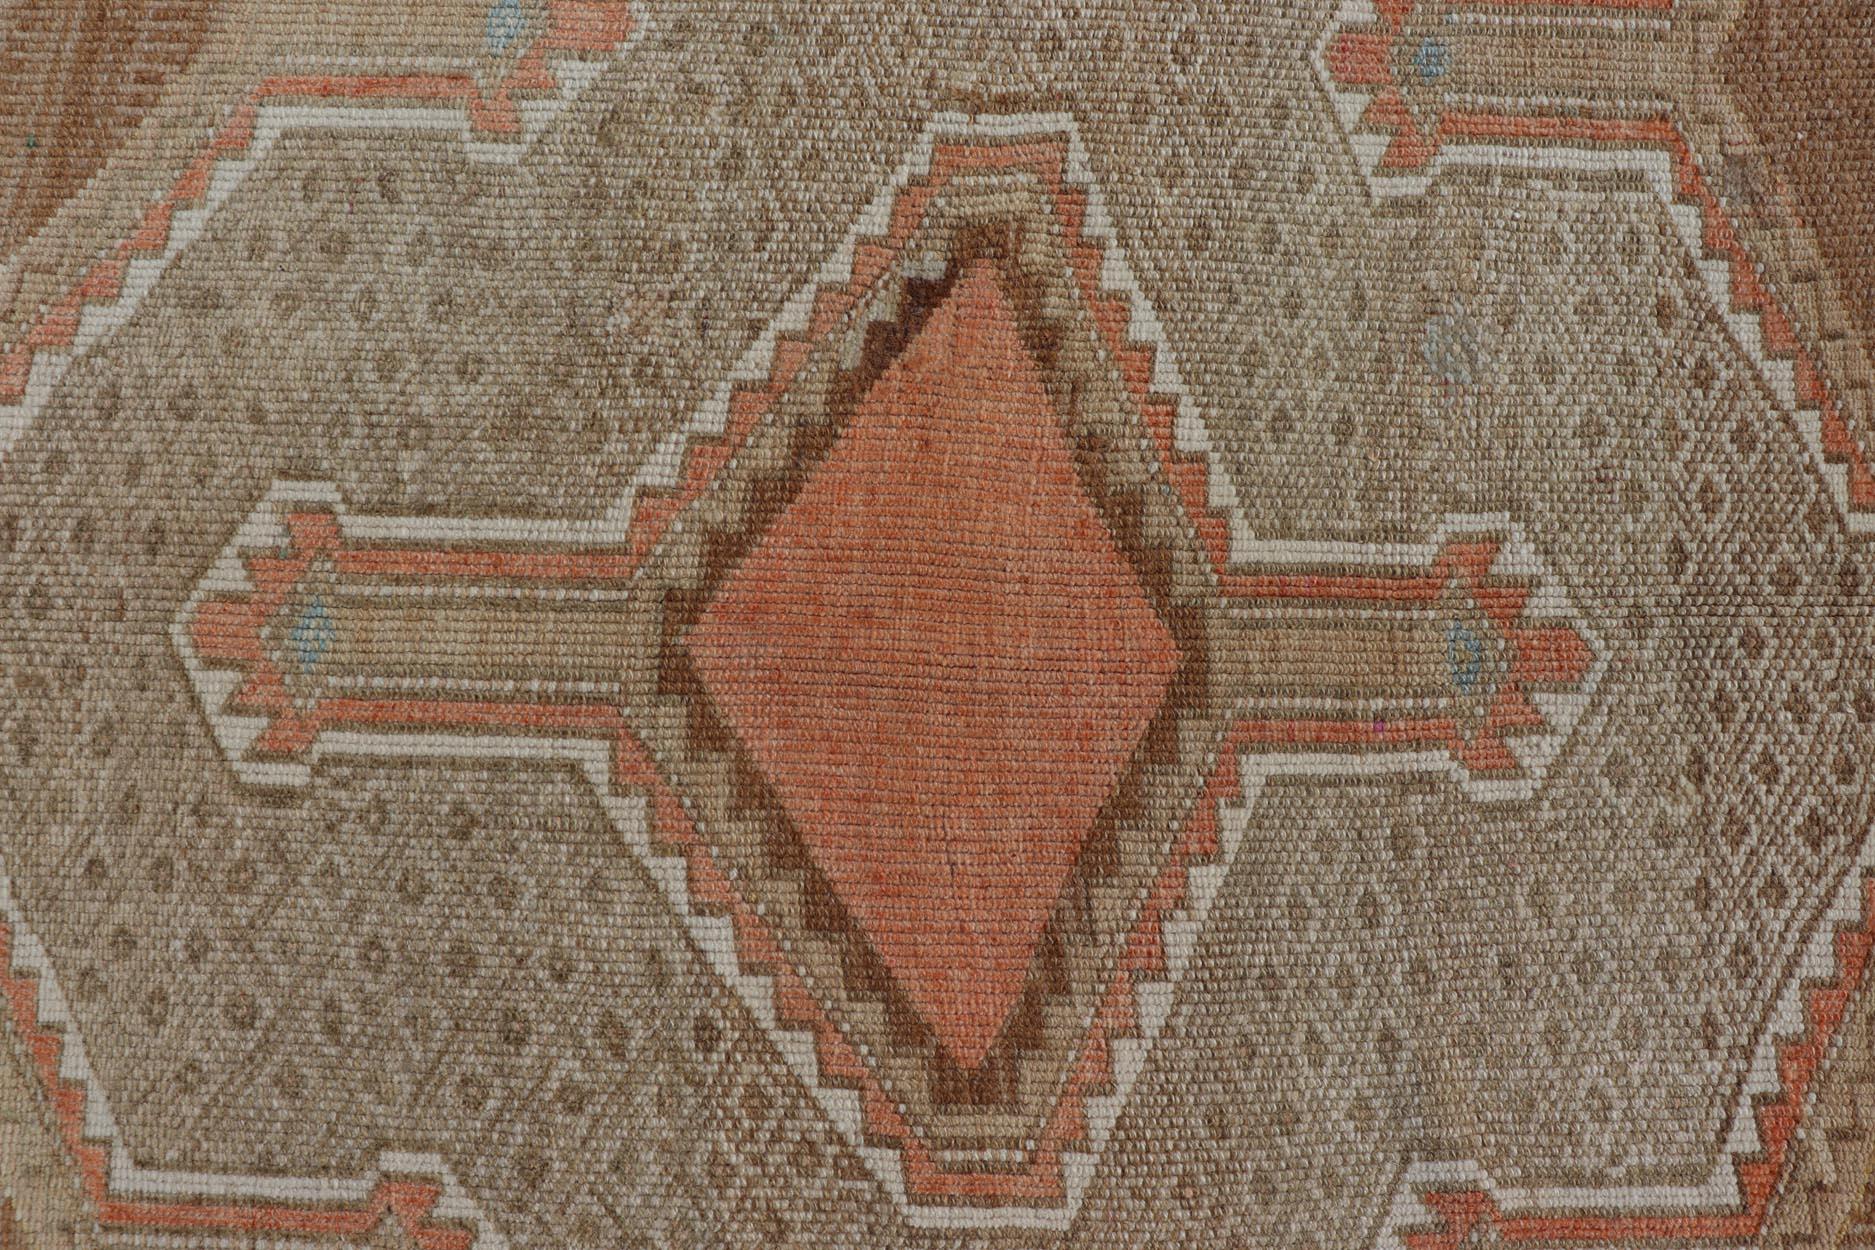 Wool Unique & Colorful Turkish Kars Runner with Tribal Designs and Geometric Motifs For Sale